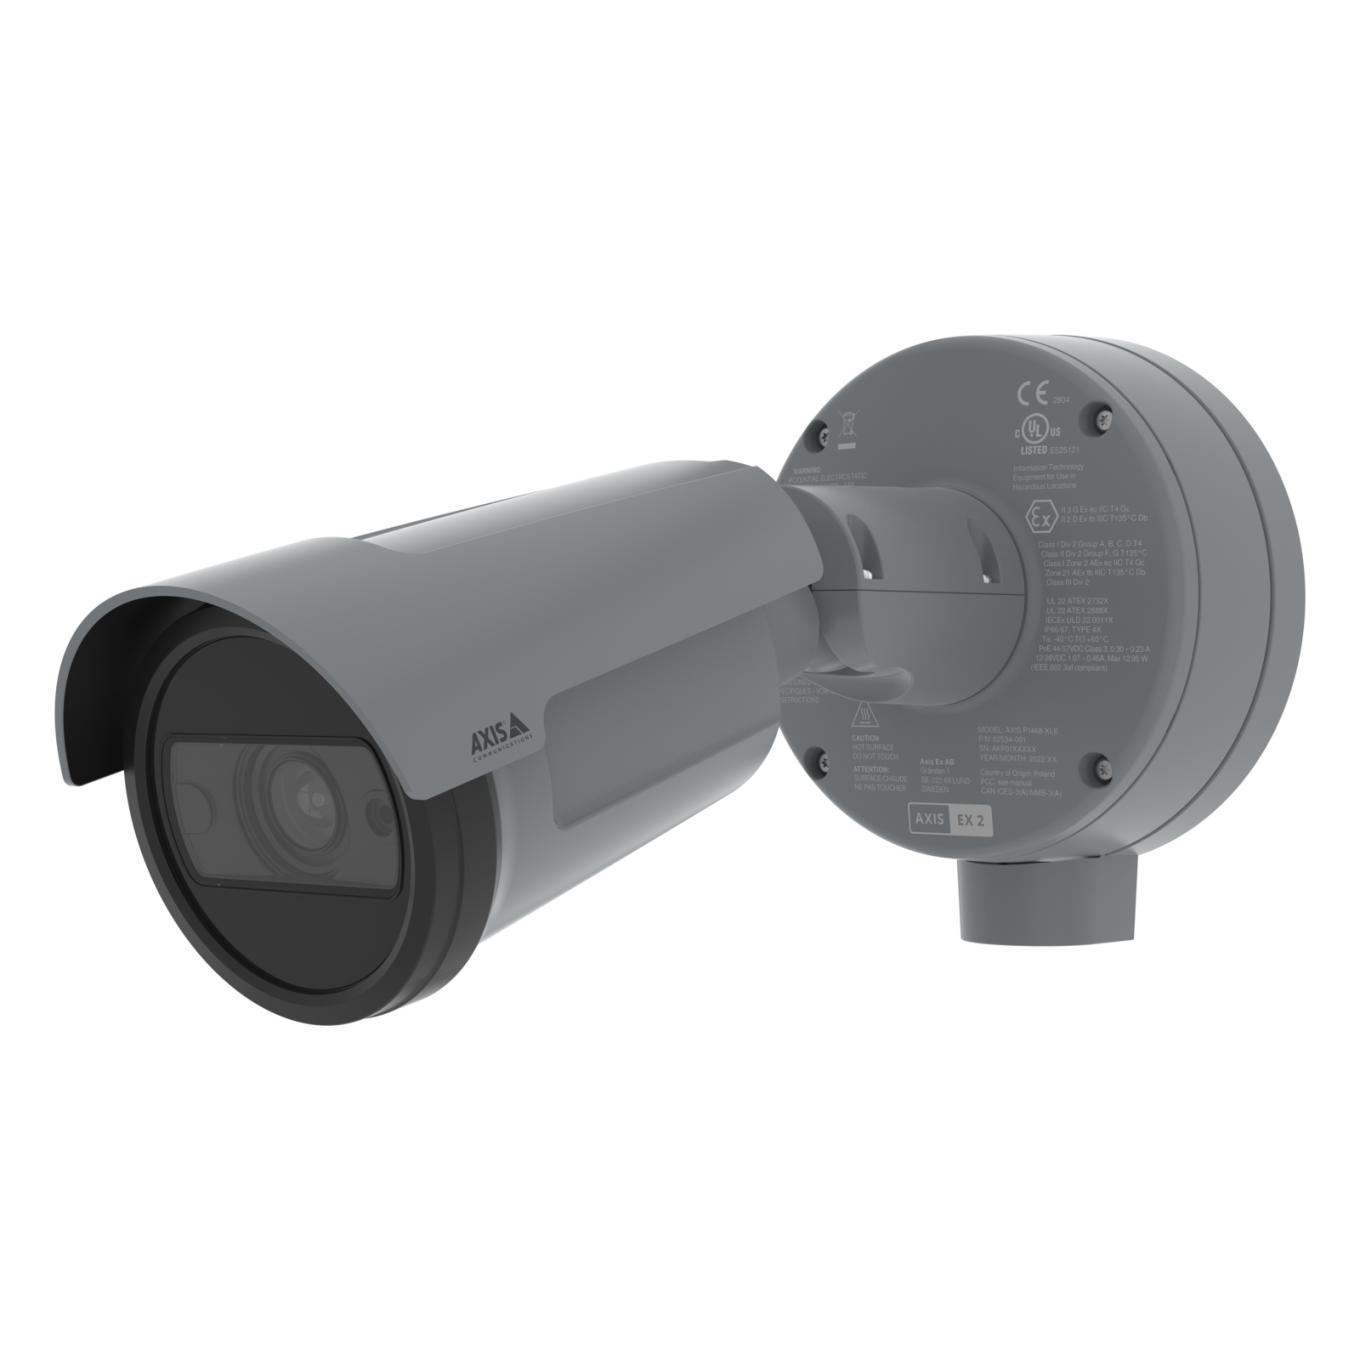 AXIS P1468-XLE Explosion-Protected Bullet Camera | Axis Communications